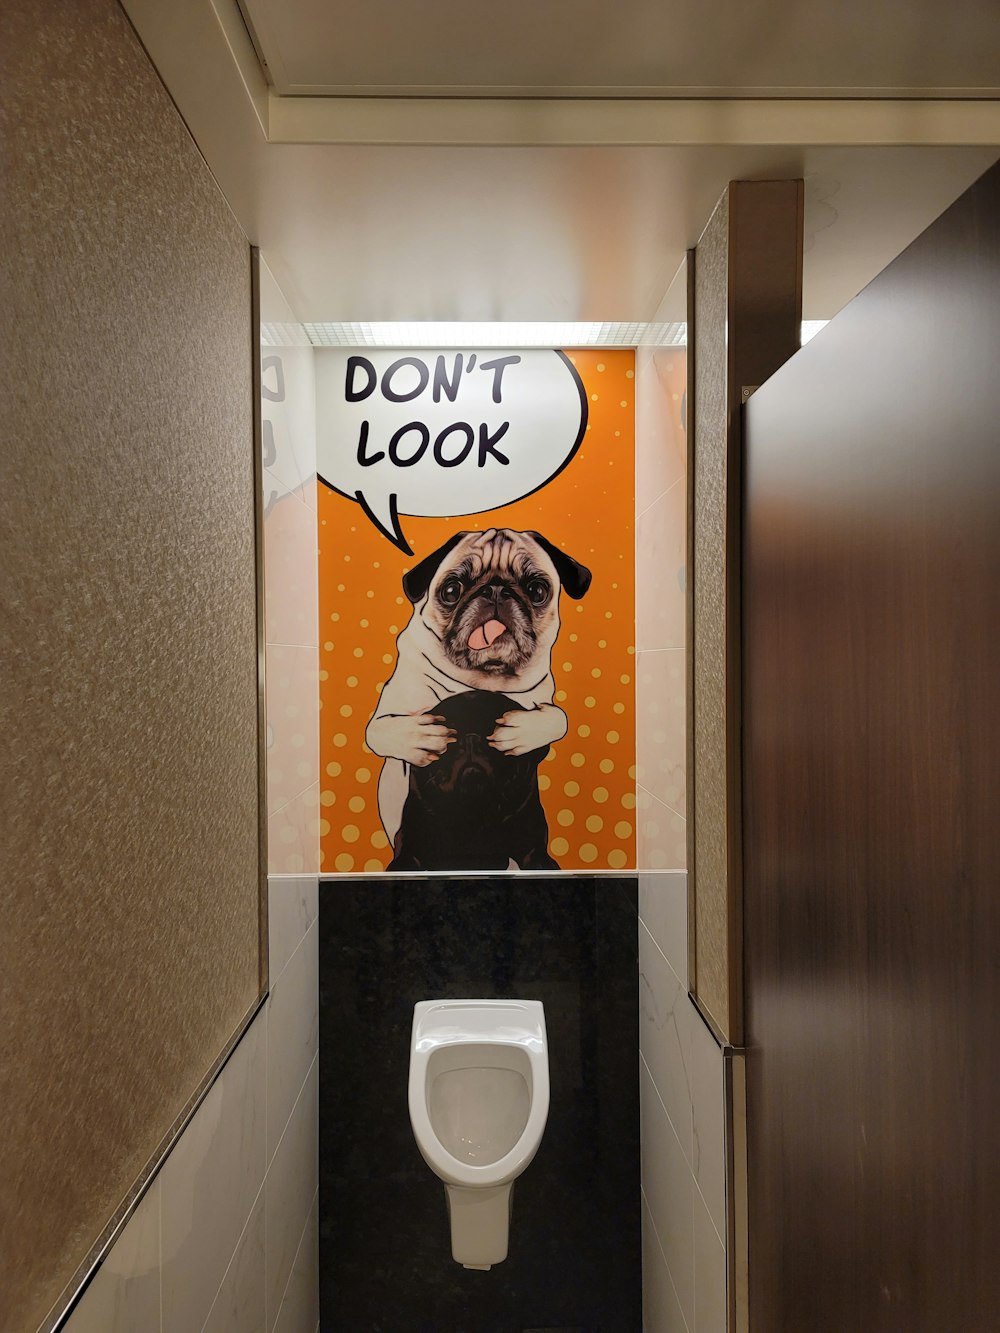 a picture of a pug dog on the wall of a bathroom stall